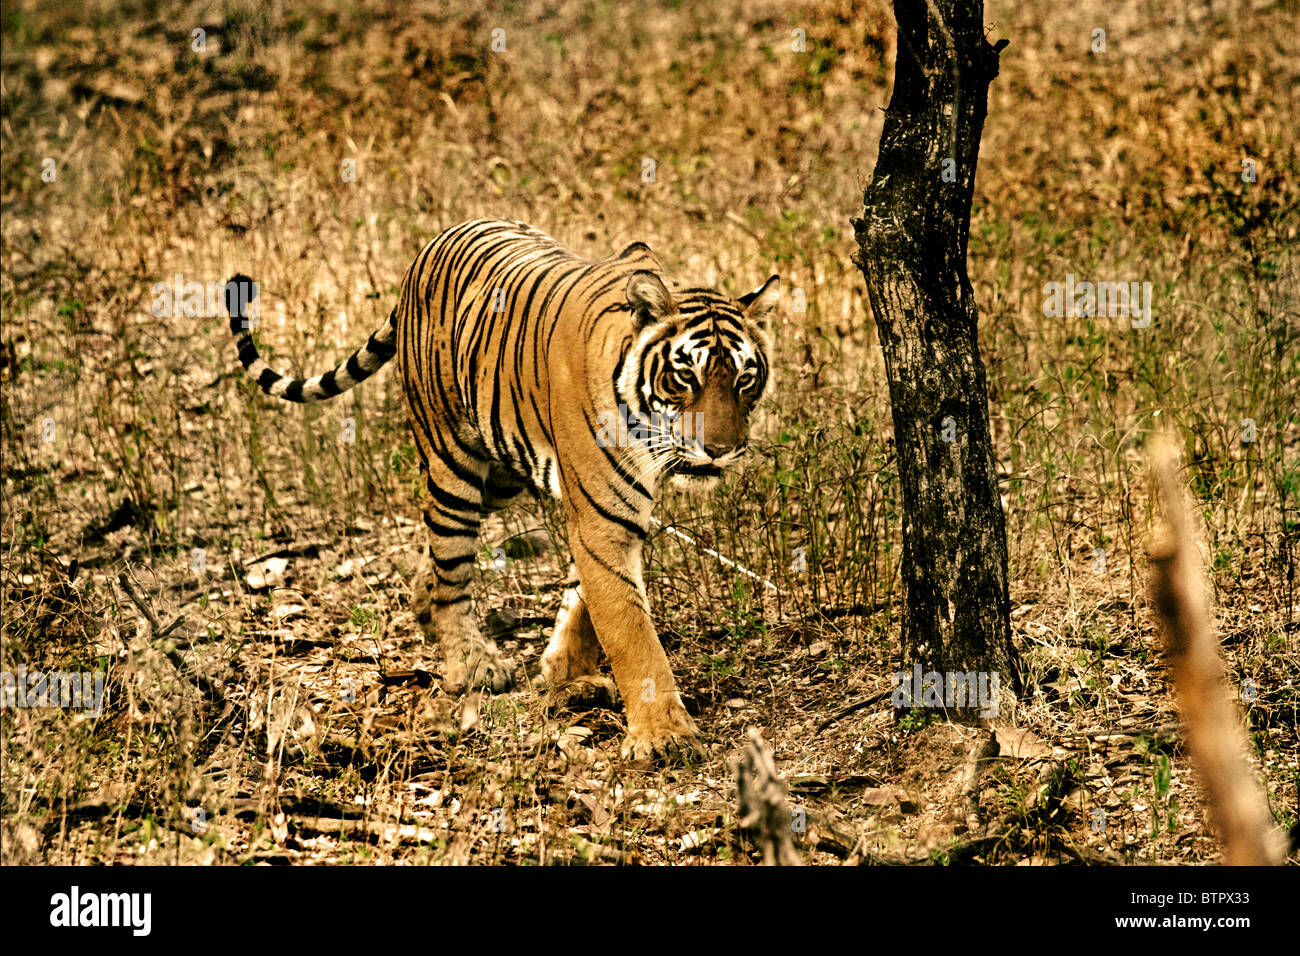 Tiger walking in the forest of Ranthambhore National Park, India Stock Photo